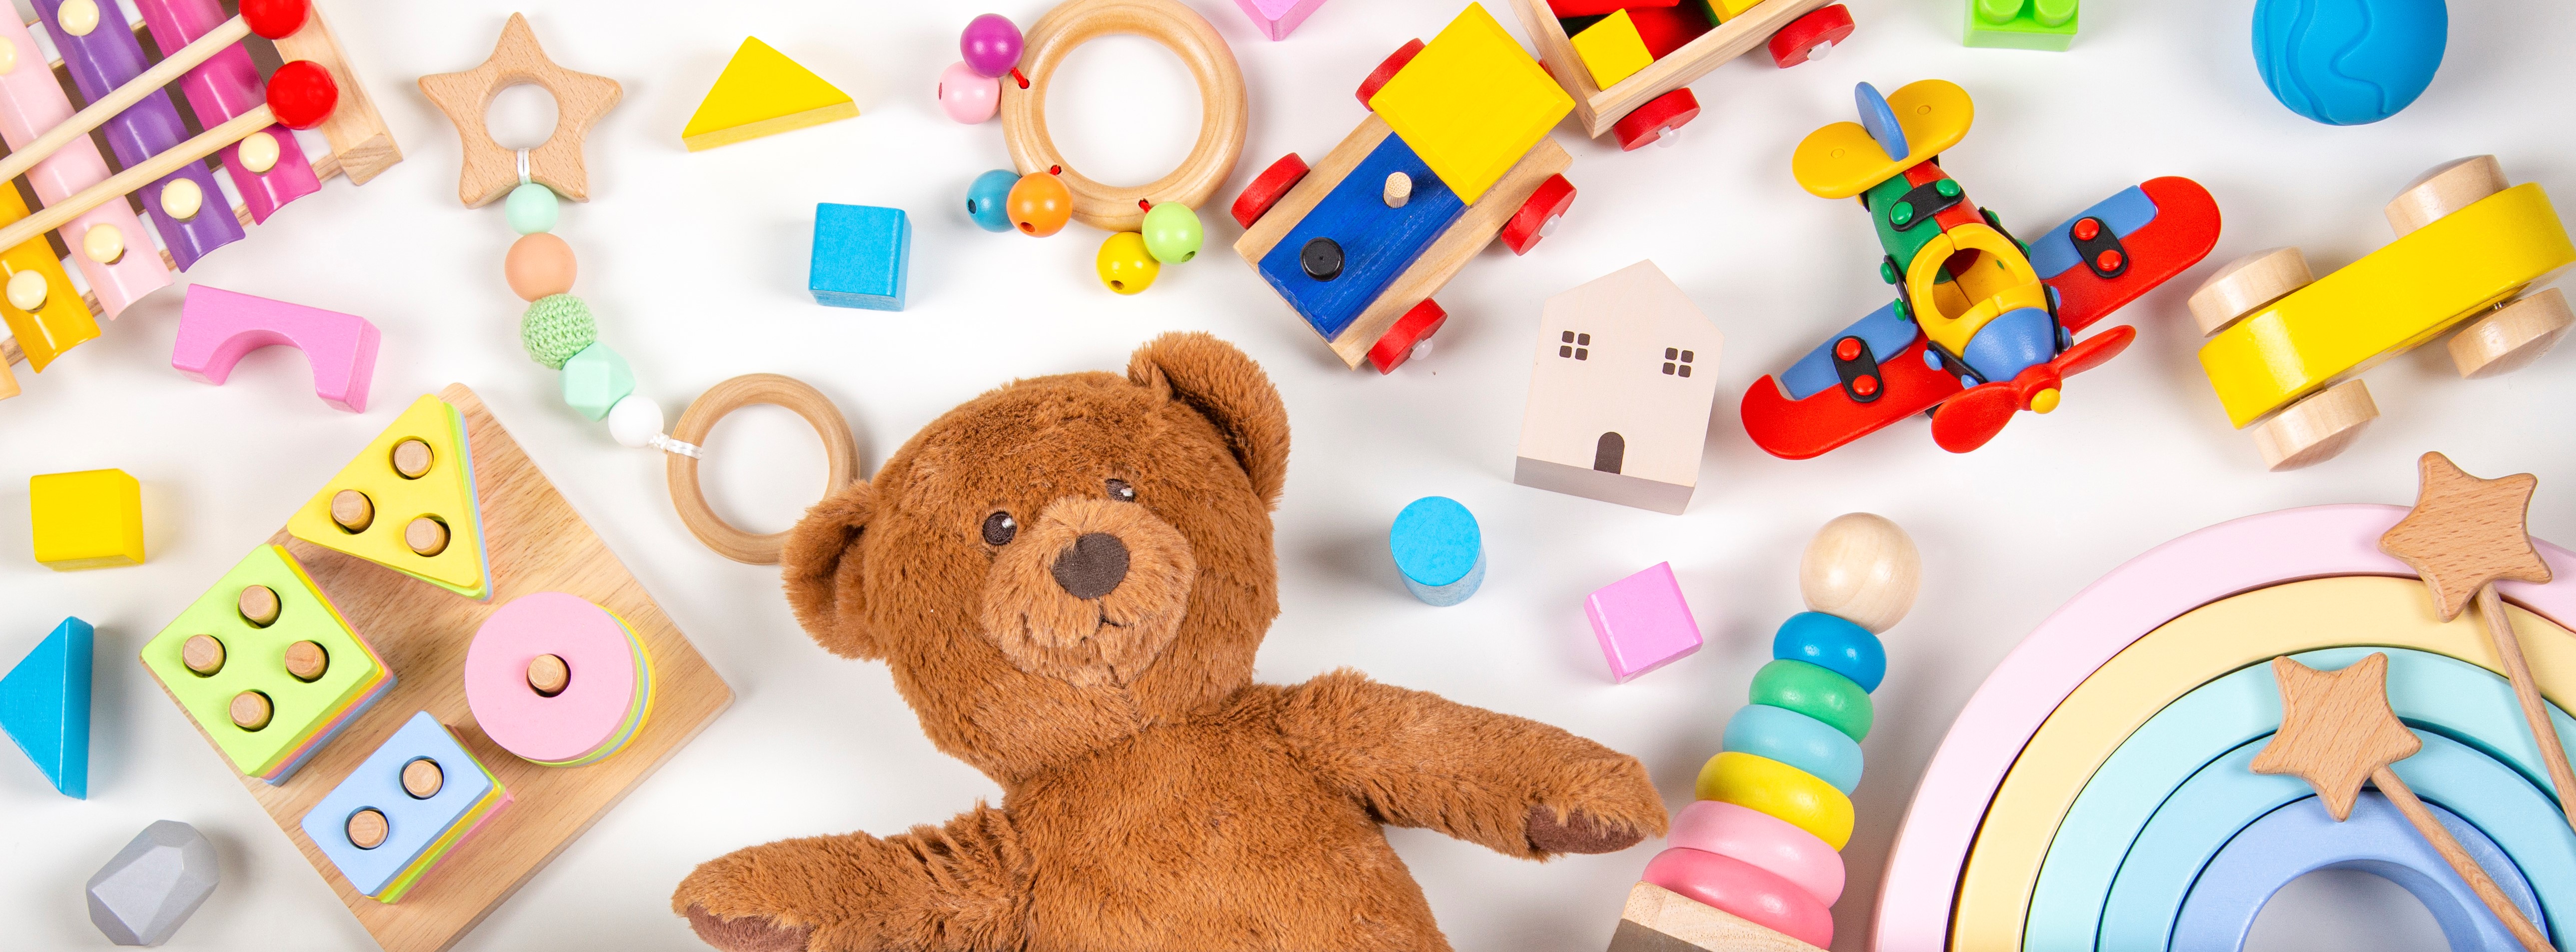 Toy Library header showing various toys